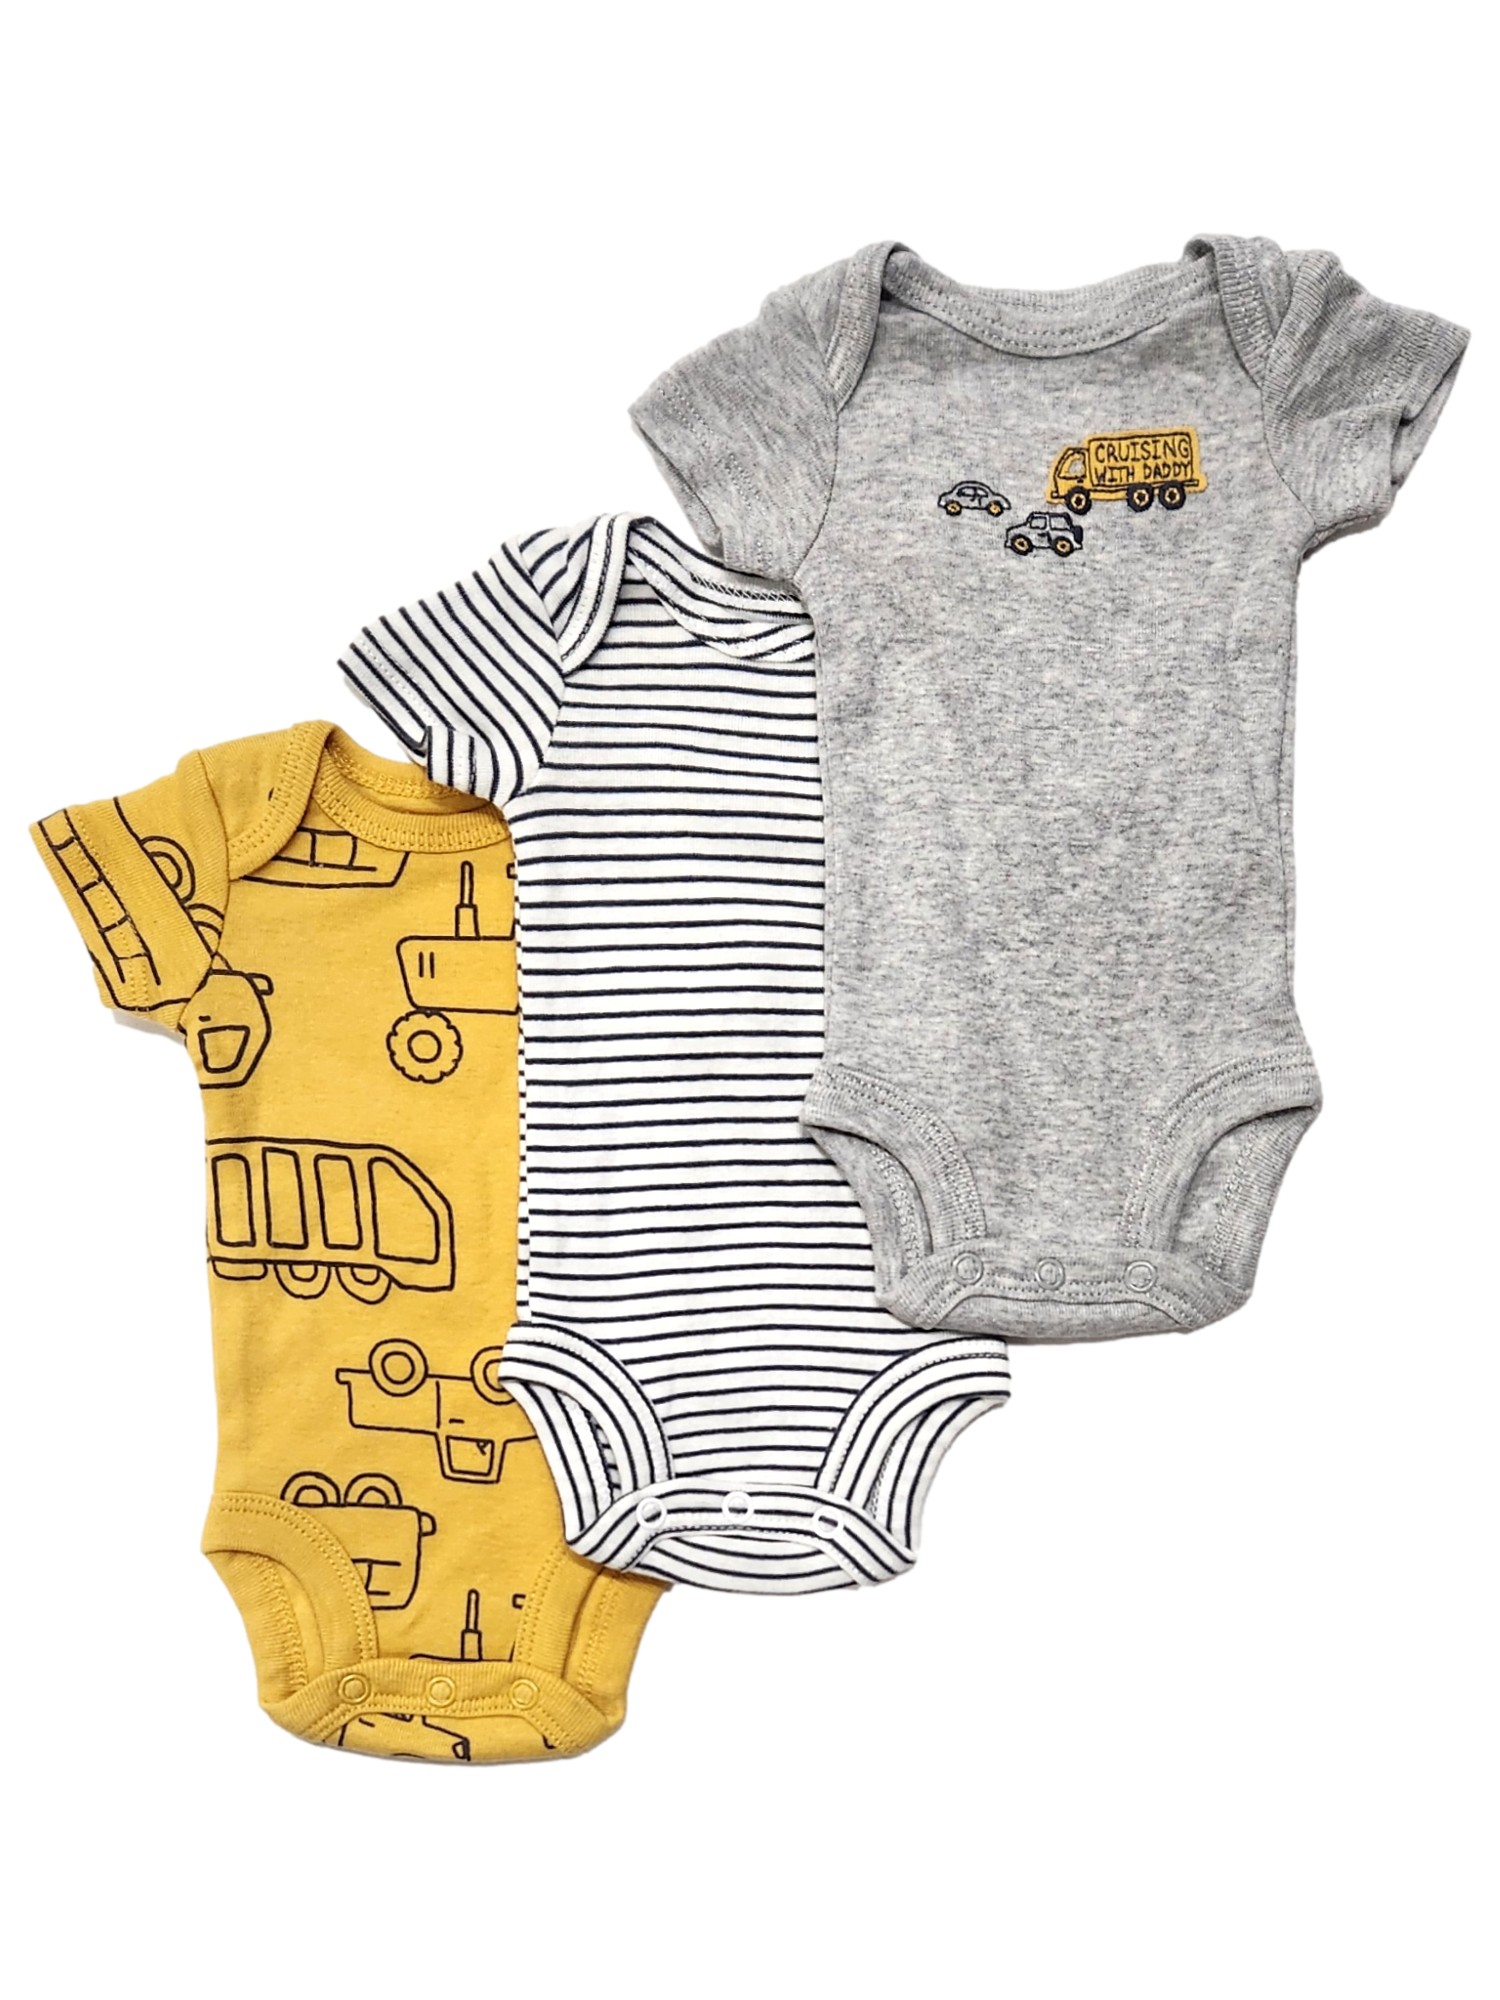 Carter's Carters Infant Boys 3pc Cruising With Daddy Bodysuits Baby Outfit Preemie